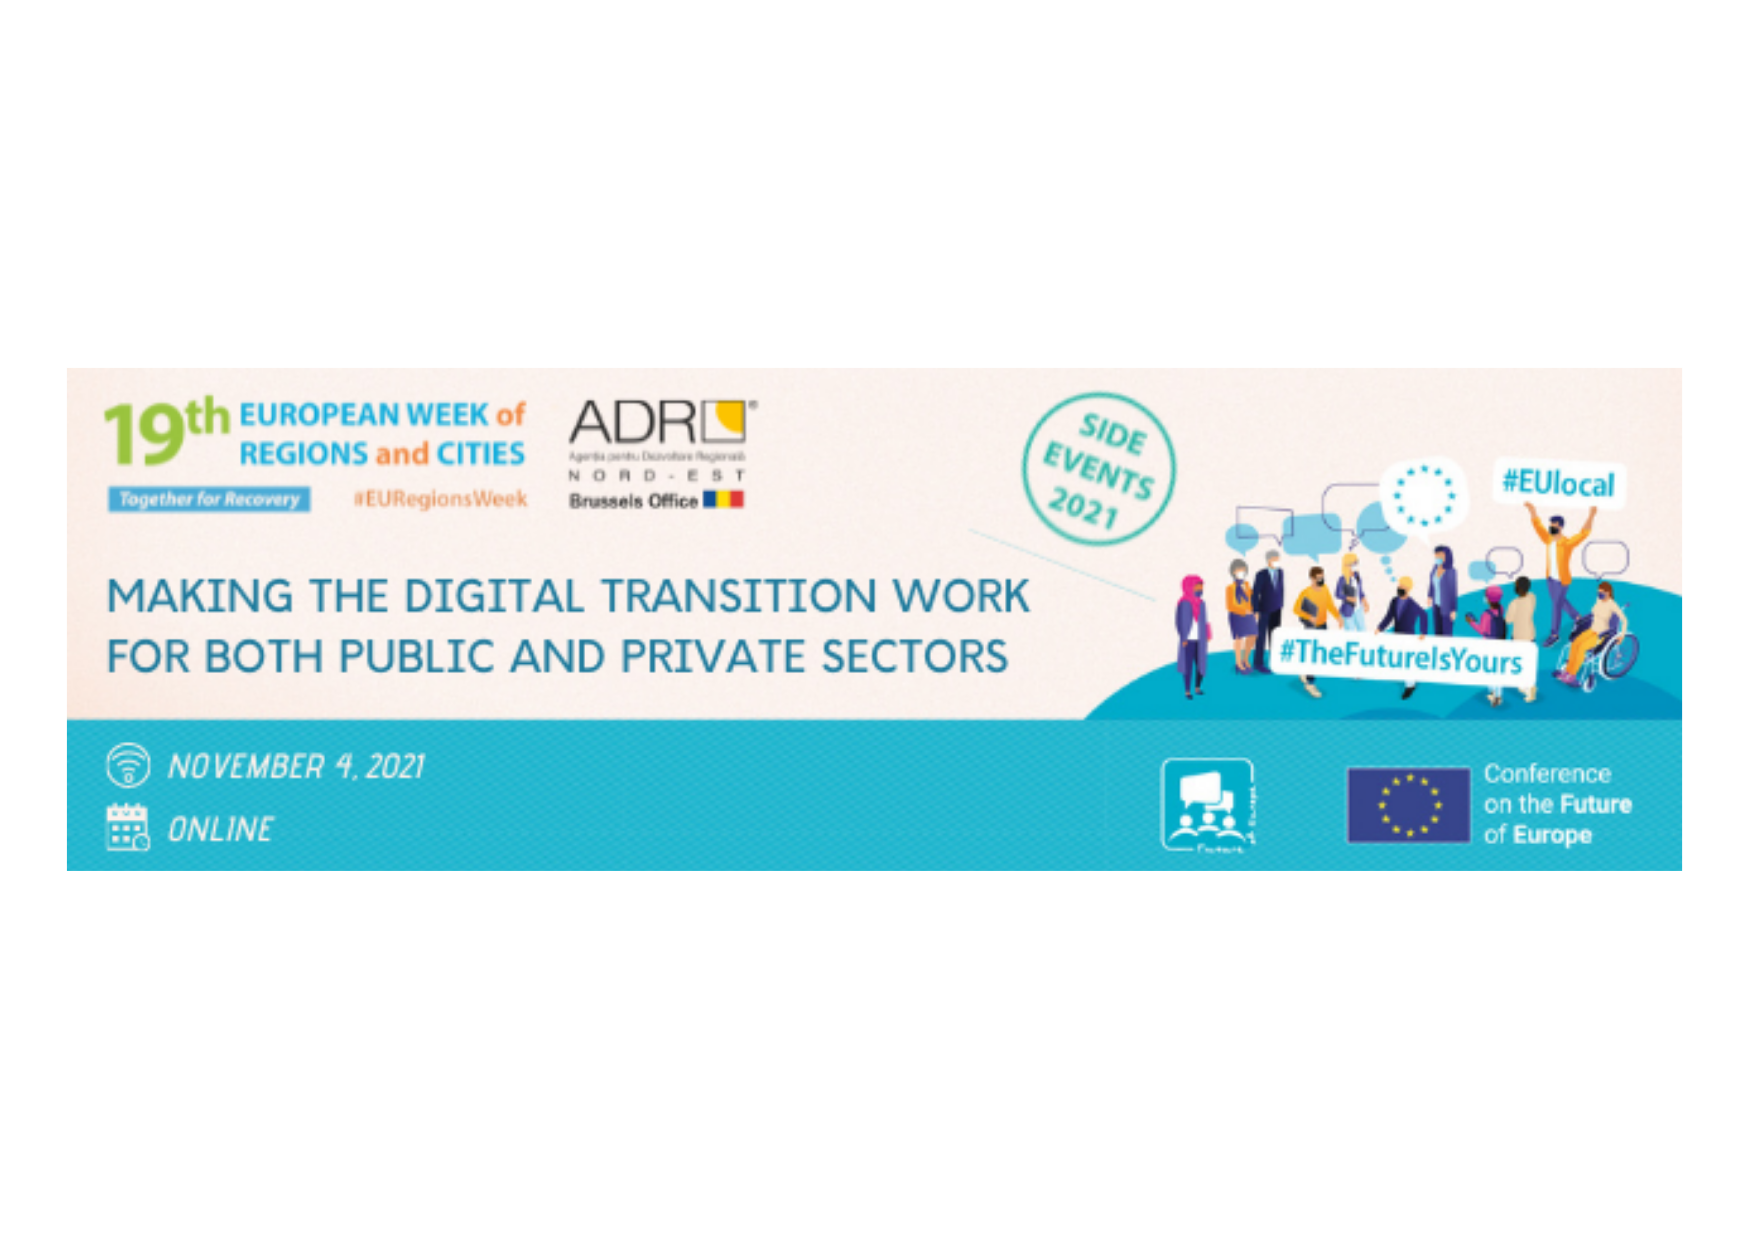 Making the digital transition work for both public and private sectors